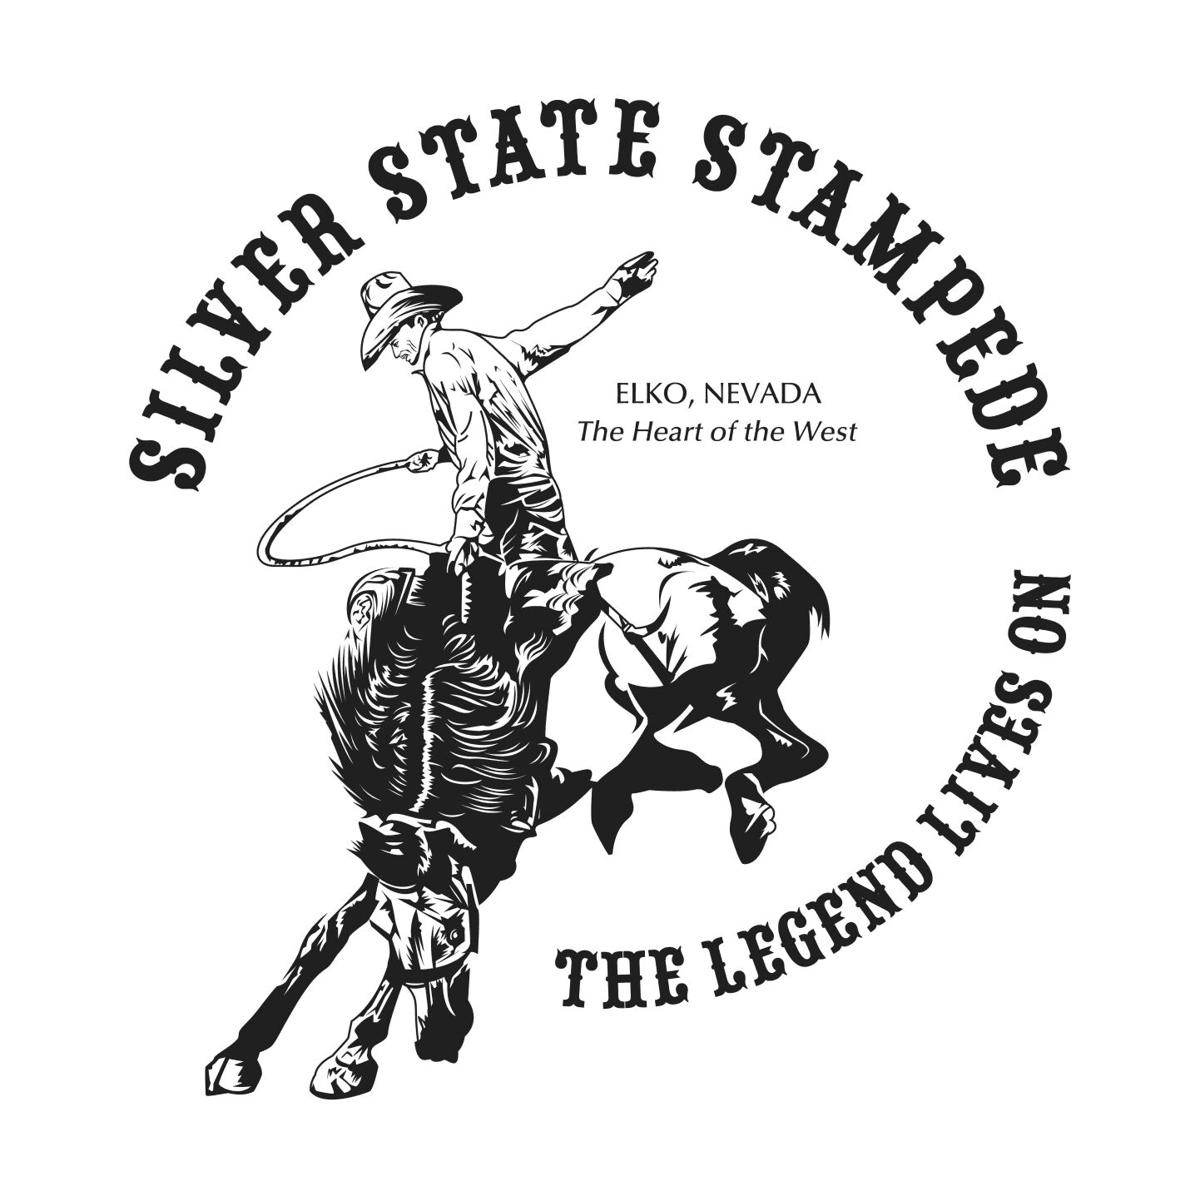 Silver State Stampede teams with Man Up Crusade for Purple Night July 8